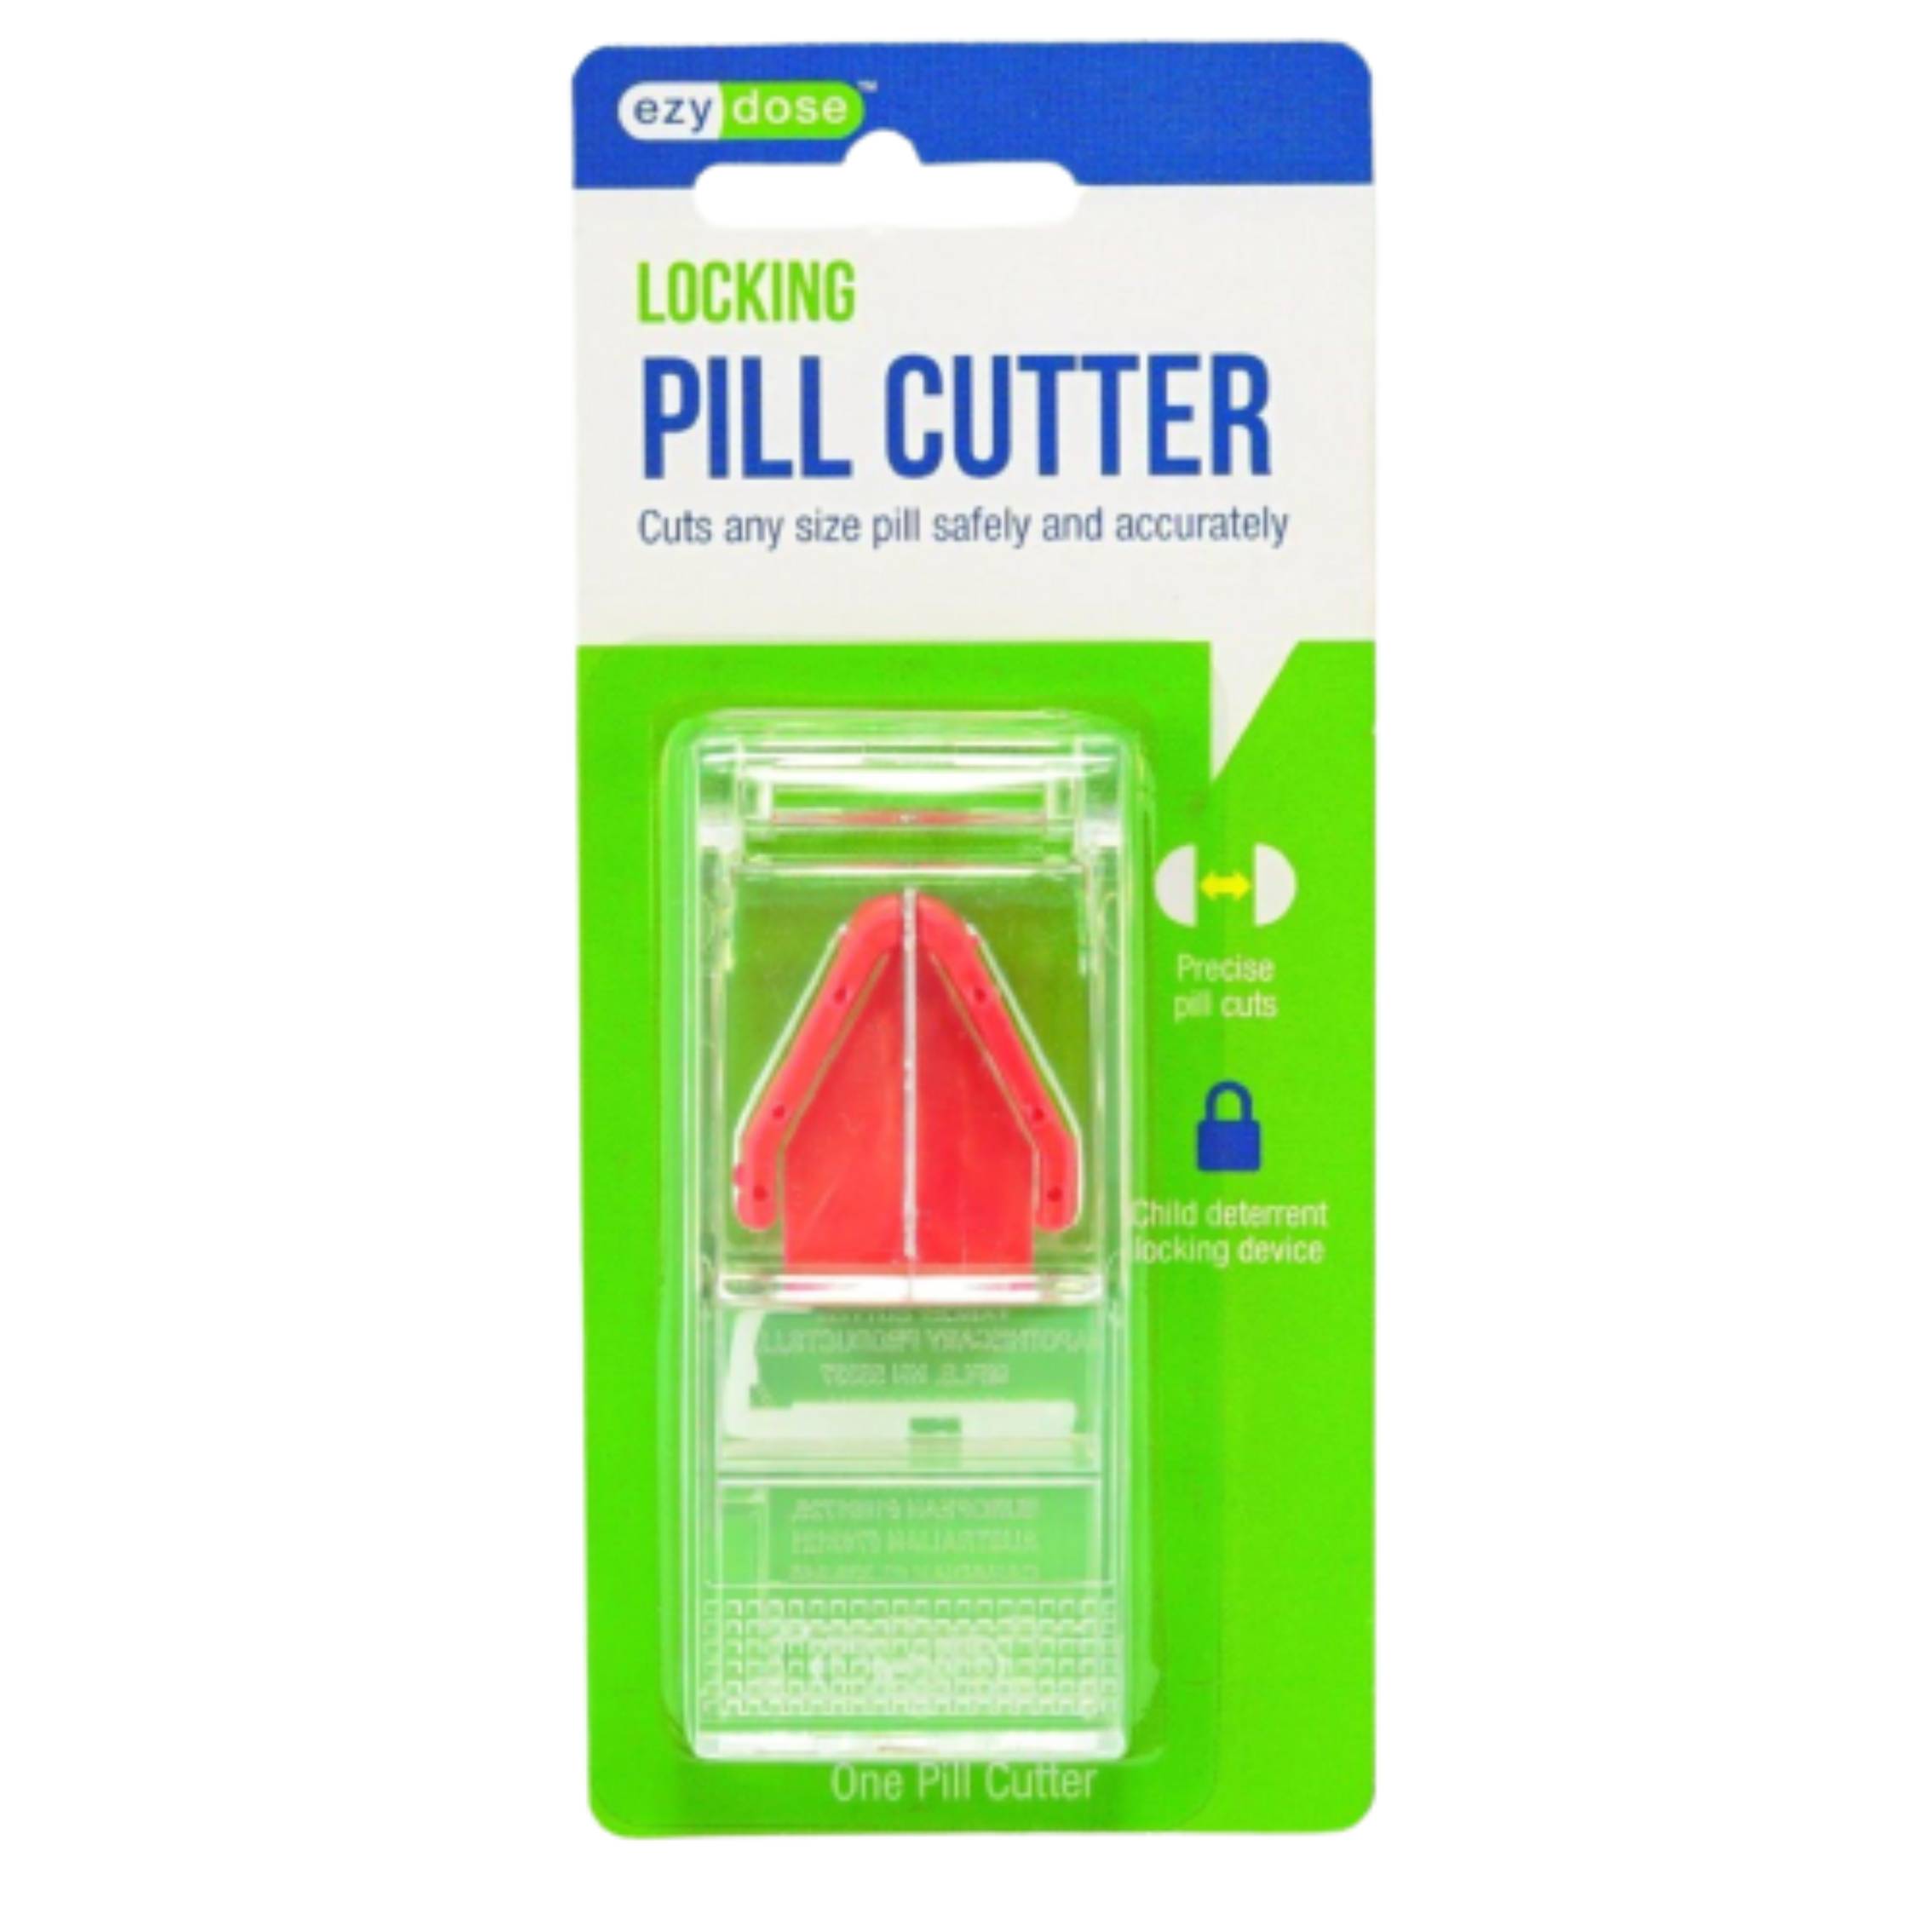 Ezy Dose Locking Pill Cutter 1s - DoctorOnCall Online Pharmacy